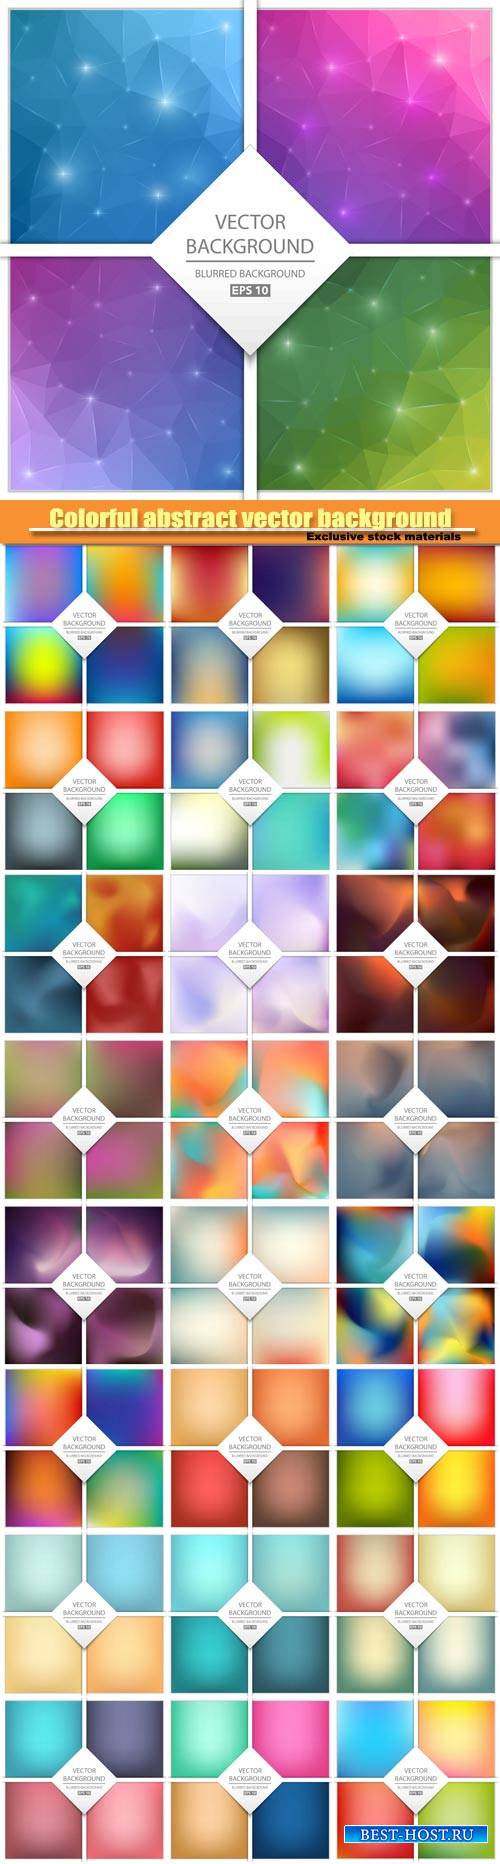 Colorful abstract vector background, art illustration template design